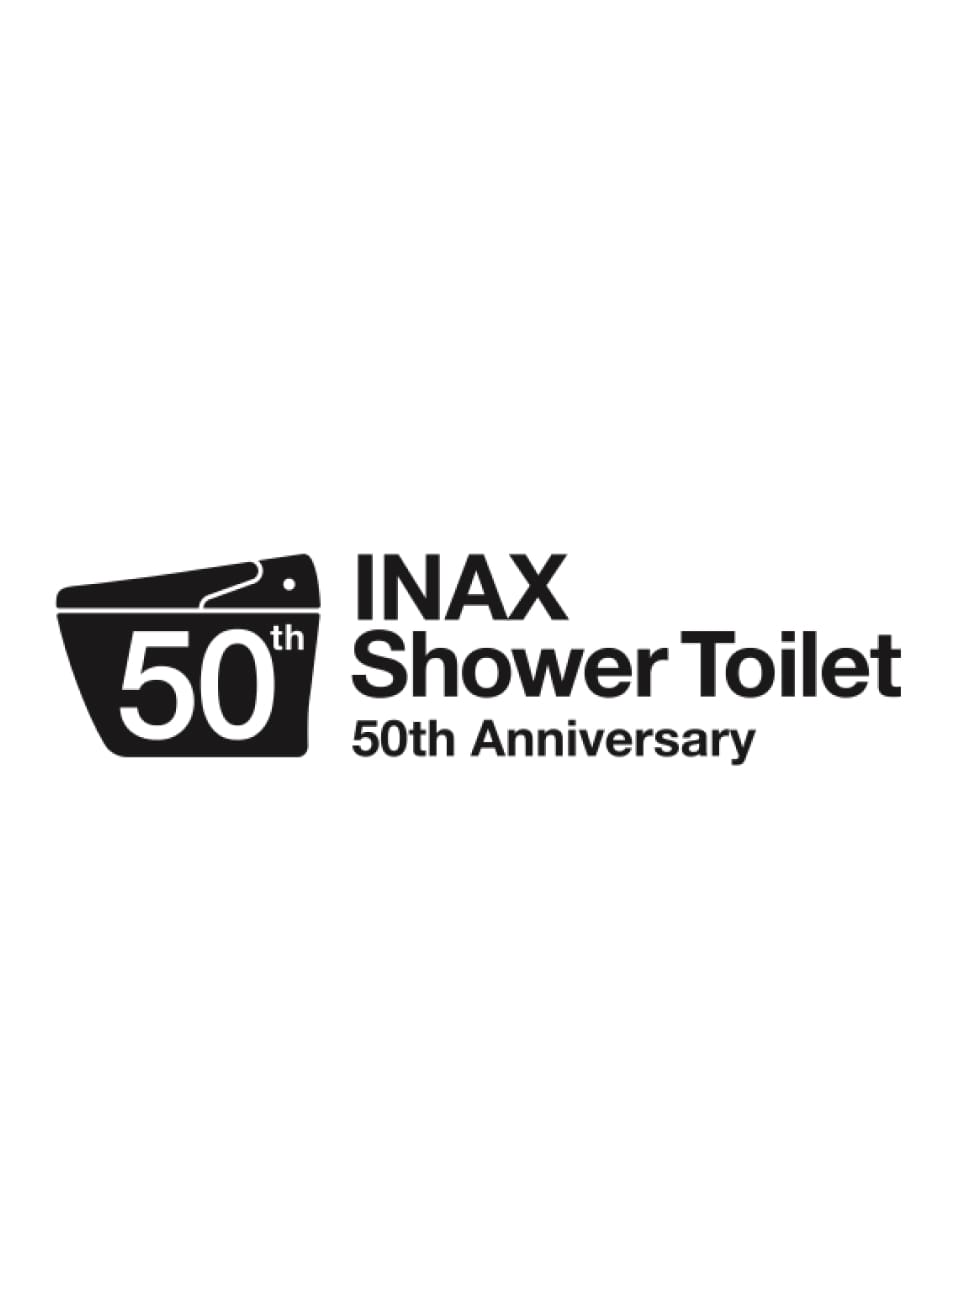 Mark of the 50th anniversary of the first made-in-Japan shower toilet launched in 1967.